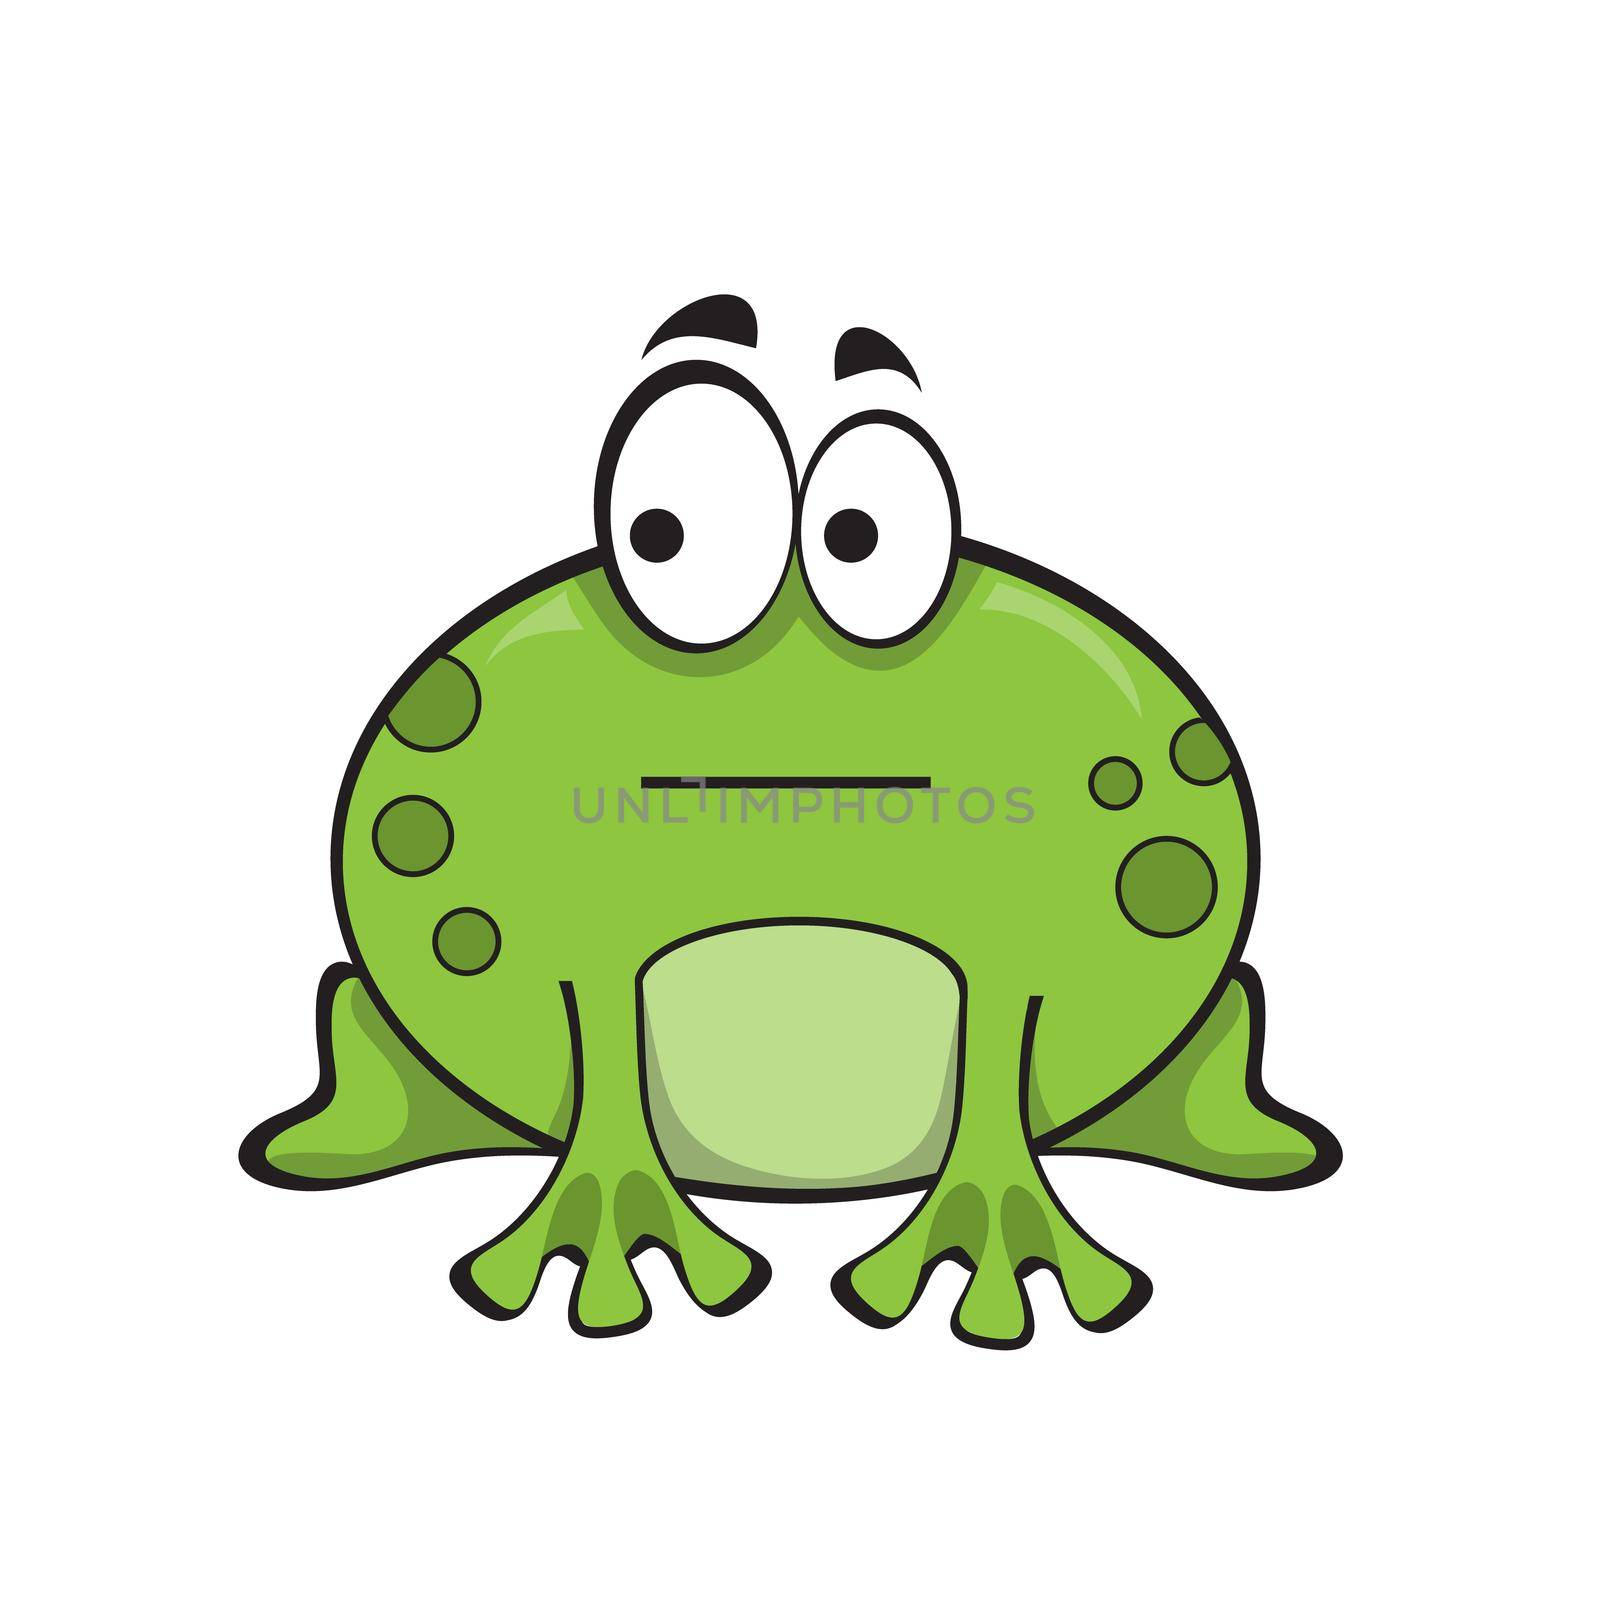 Cute green frog with indifferent emotion. The frog looks to the side. Cartoon icon on white